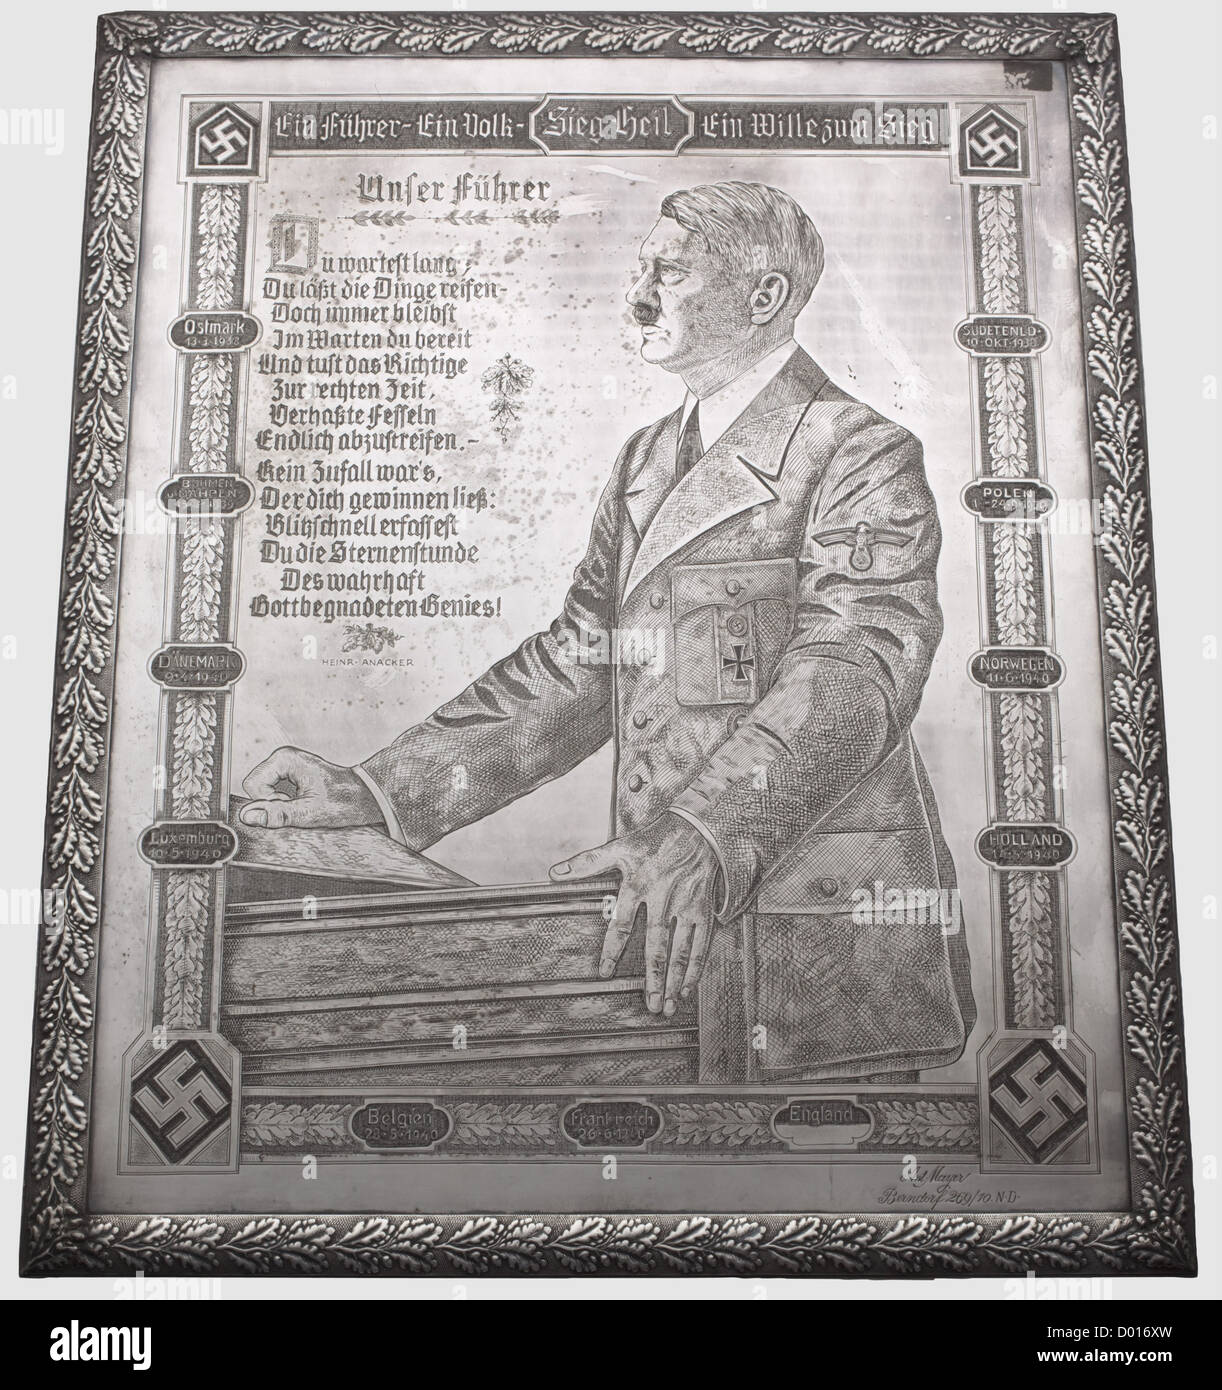 Adolf Hitler - a large, engraved homage panel from the Berndorf Metalware Factory 1940/41, Rectangular, hard silver-plated tablet with an oak leaf décor in relief on a raised edge. The centre with a masterfully engraved depiction of Adolf Hitler in party uniform, wearing an Iron Cross and Party Badge, at a speaker's lectern, with the poem 'Unser Führer' by Heinrich Anacker in the upper left corner. The depiction framed by an oak leaf border with the heading 'Ein Führer - Ein Volk - Ein Wille zum Sieg - Sieg Heil' with swastikas in the corners and continuous car, Stock Photo